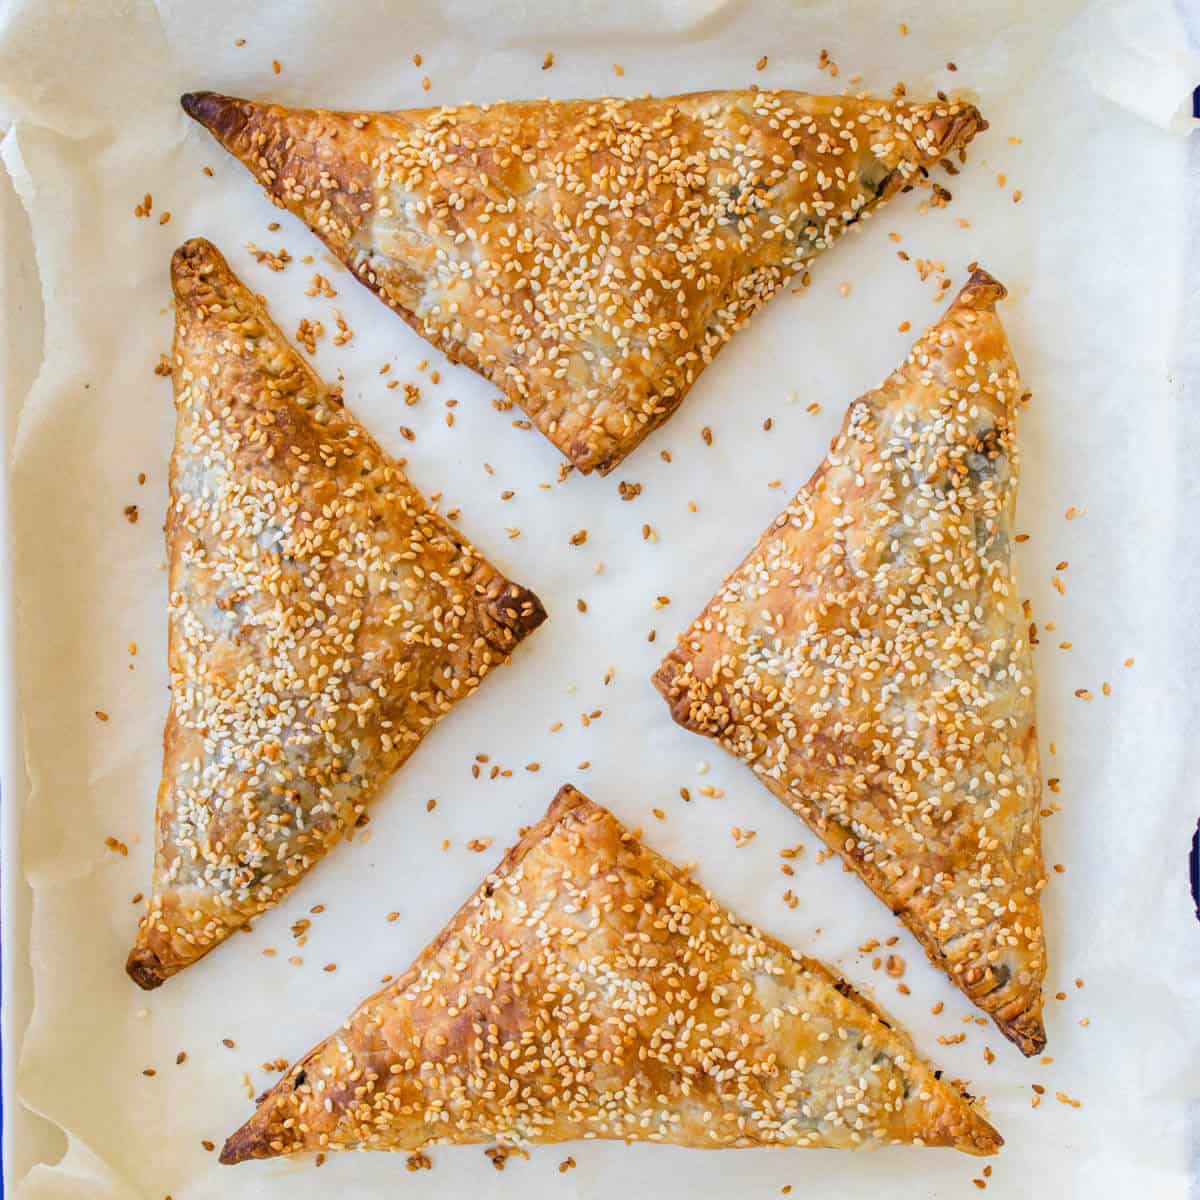 Baked spinach and feta triangles on an oven tray